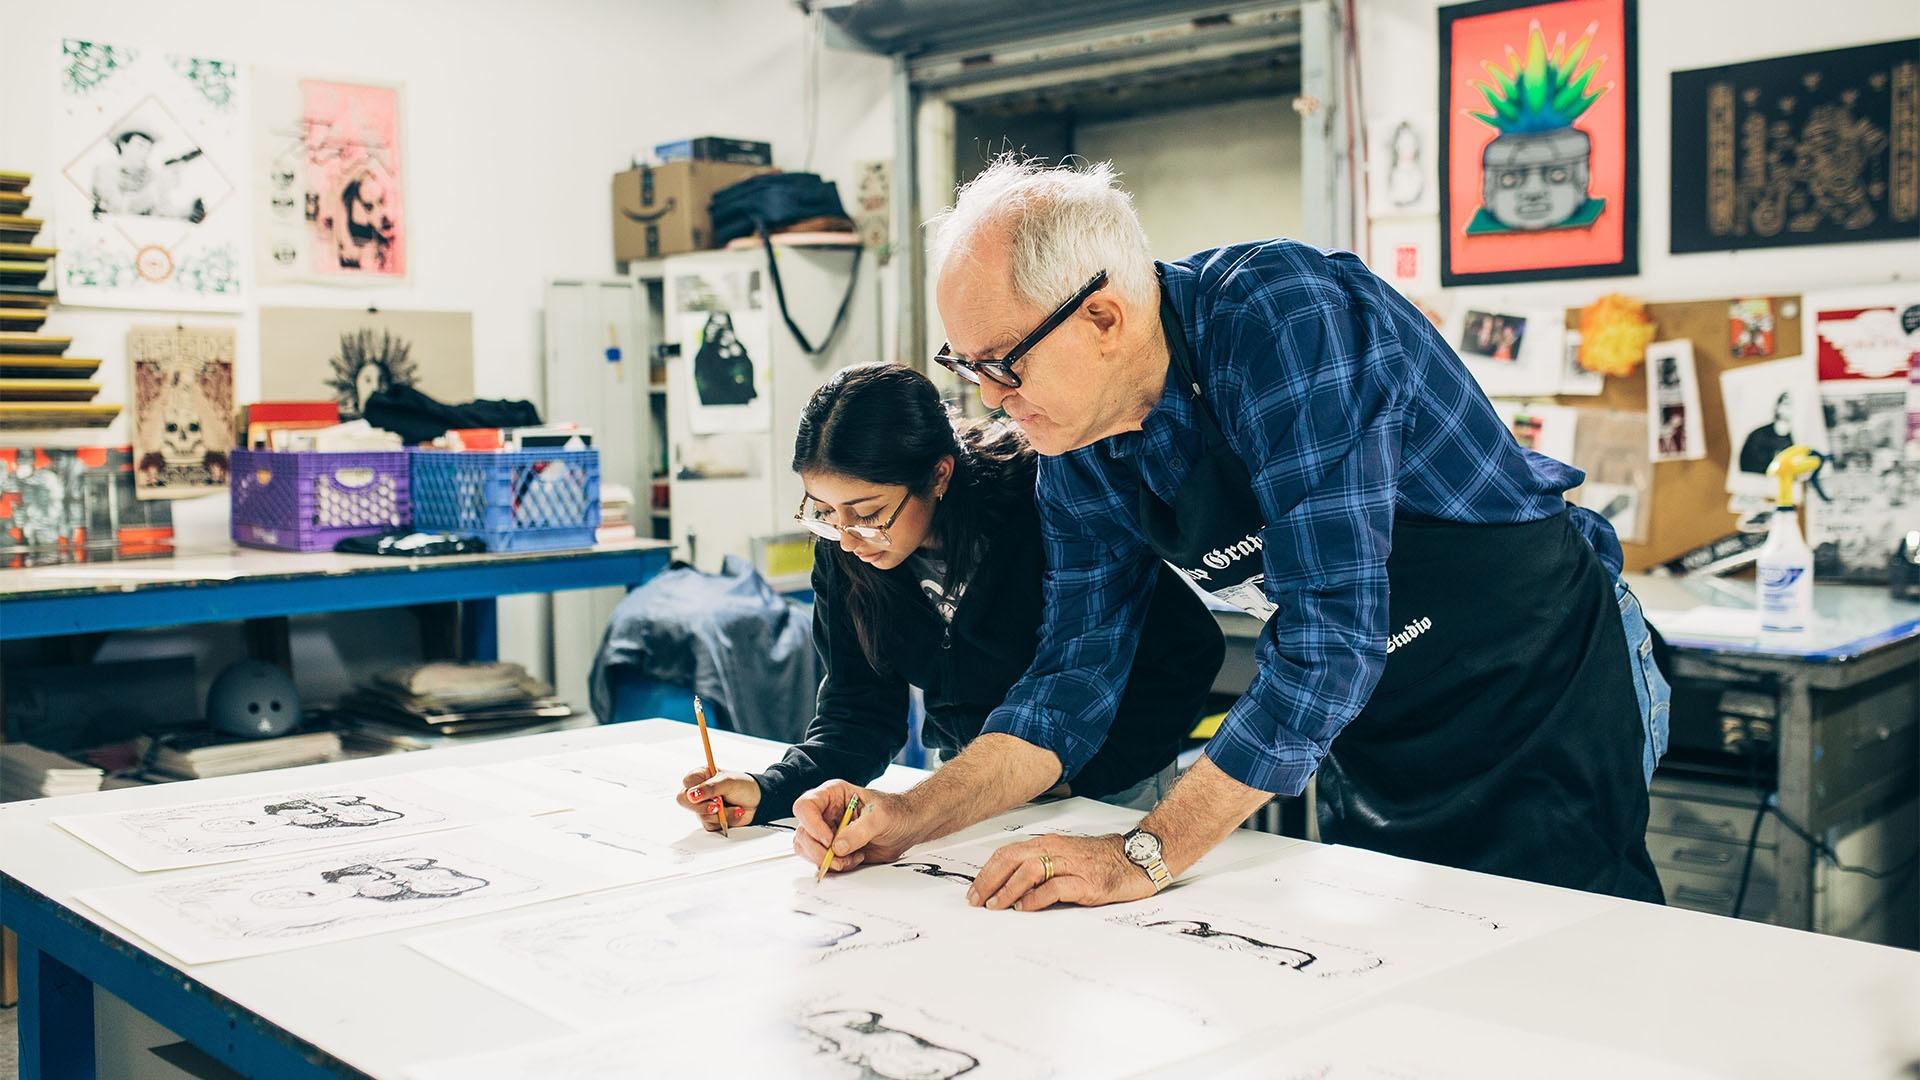 John Lithgow in an illustration studio with a student, each drawing on their own paper surrounded by art